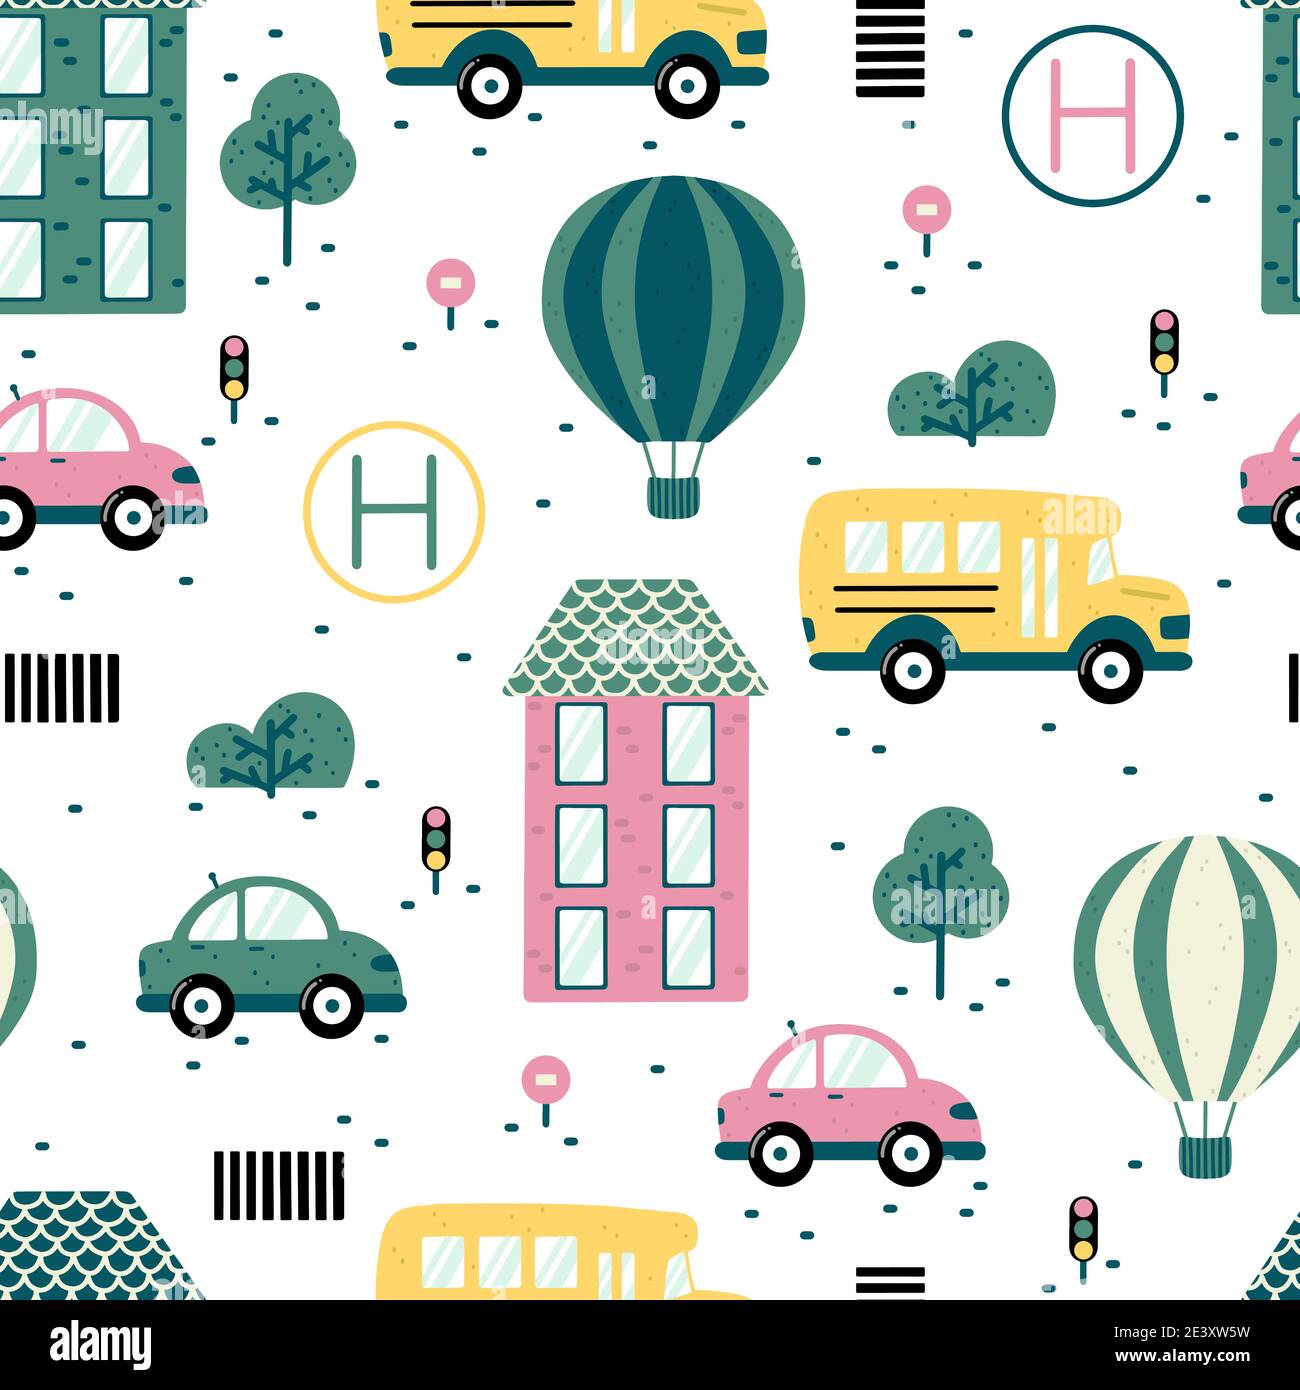 City scene seamless pattern with hot air balloon, school bus, helicopter pad, car, traffic lights, crosswalk, house, trees and abstract elements. Hand Stock Vector